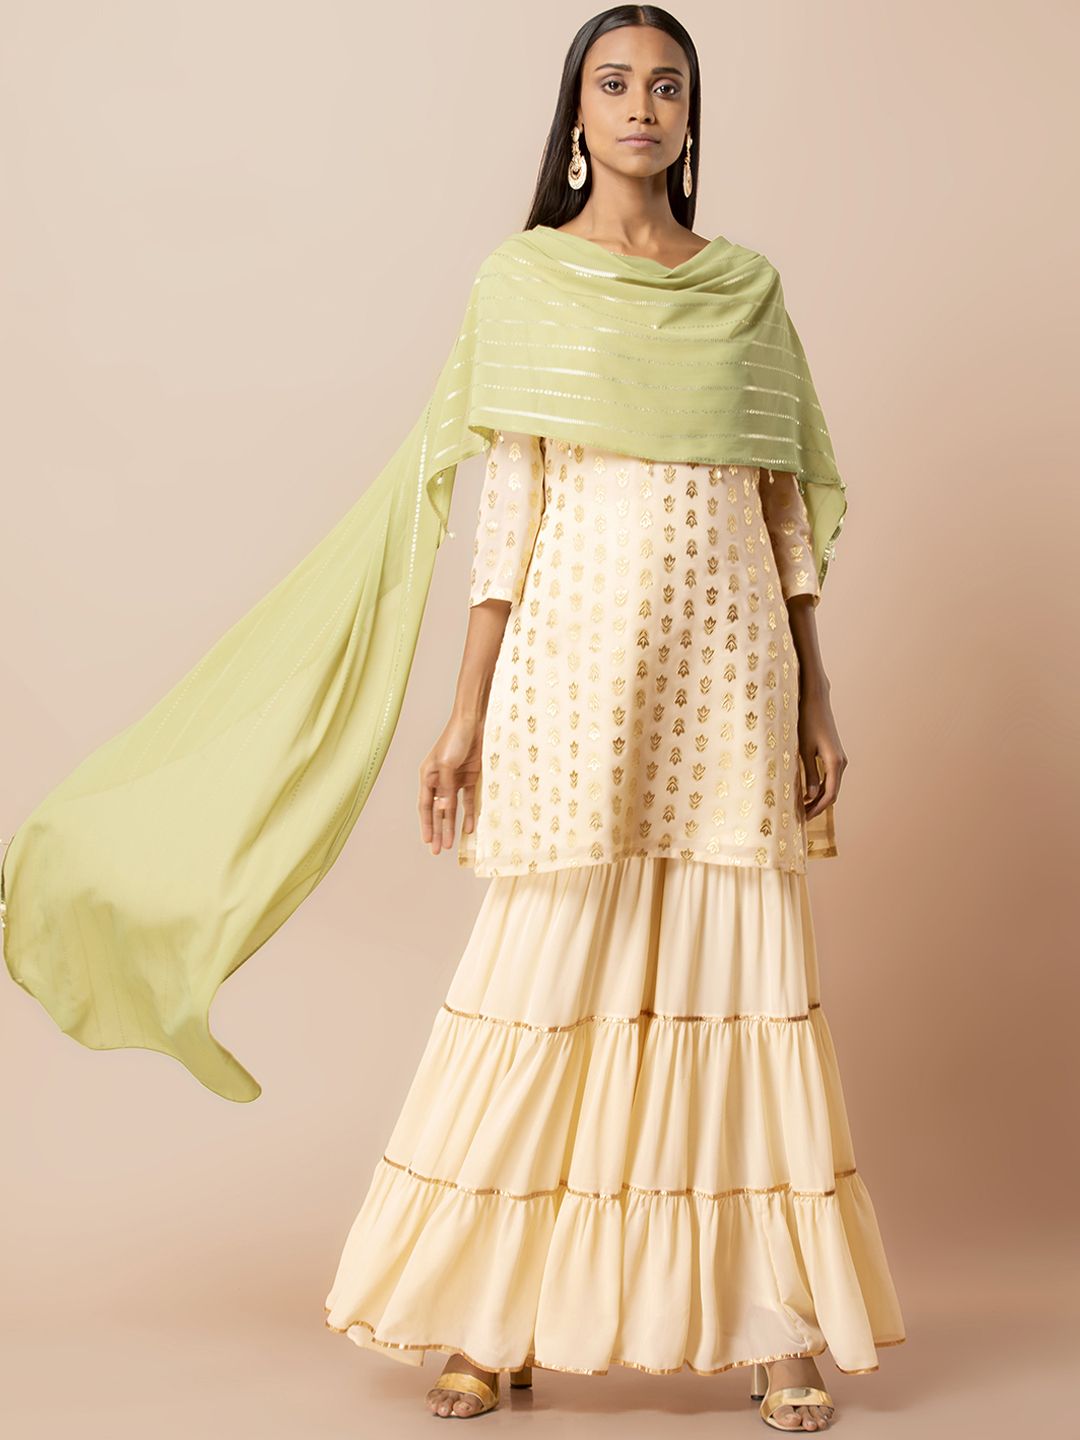 INDYA Cream & Green Colored Printed Short Kurti With Attached Striped Dupatta Price in India